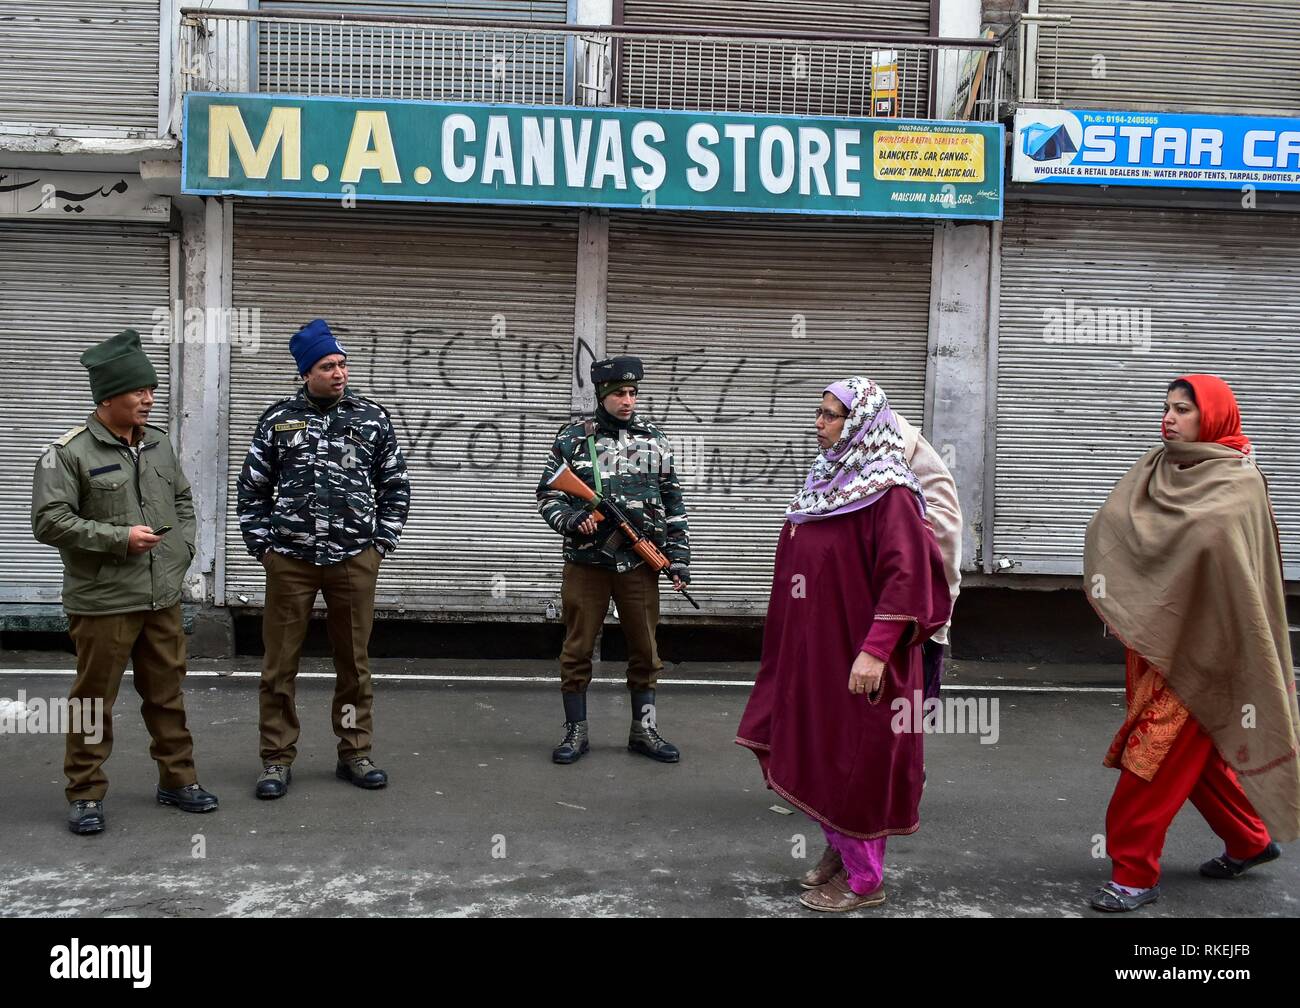 February 11, 2019 - Srinagar, J&K, India - Kashmiri women walk past paramilitary troopers standing alert during restrictions in Srinagar, Indian administered Kashmir. Curfew-like restrictions have been imposed in parts of Srinagar city in the wake of a call for strike by separatist groups to commemorate the death anniversary of Maqbool Bhat, the Jammu and Kashmir Liberation Front (JKLF) founder who was hanged on Feb 11, 1984 in Delhi's Tihar Jail. The separatist leaders and activists staged a protest demanding back the mortal remains of slain Maqbool Bhat. (Credit Image: © Saqib Majeed/SOPA I Stock Photo